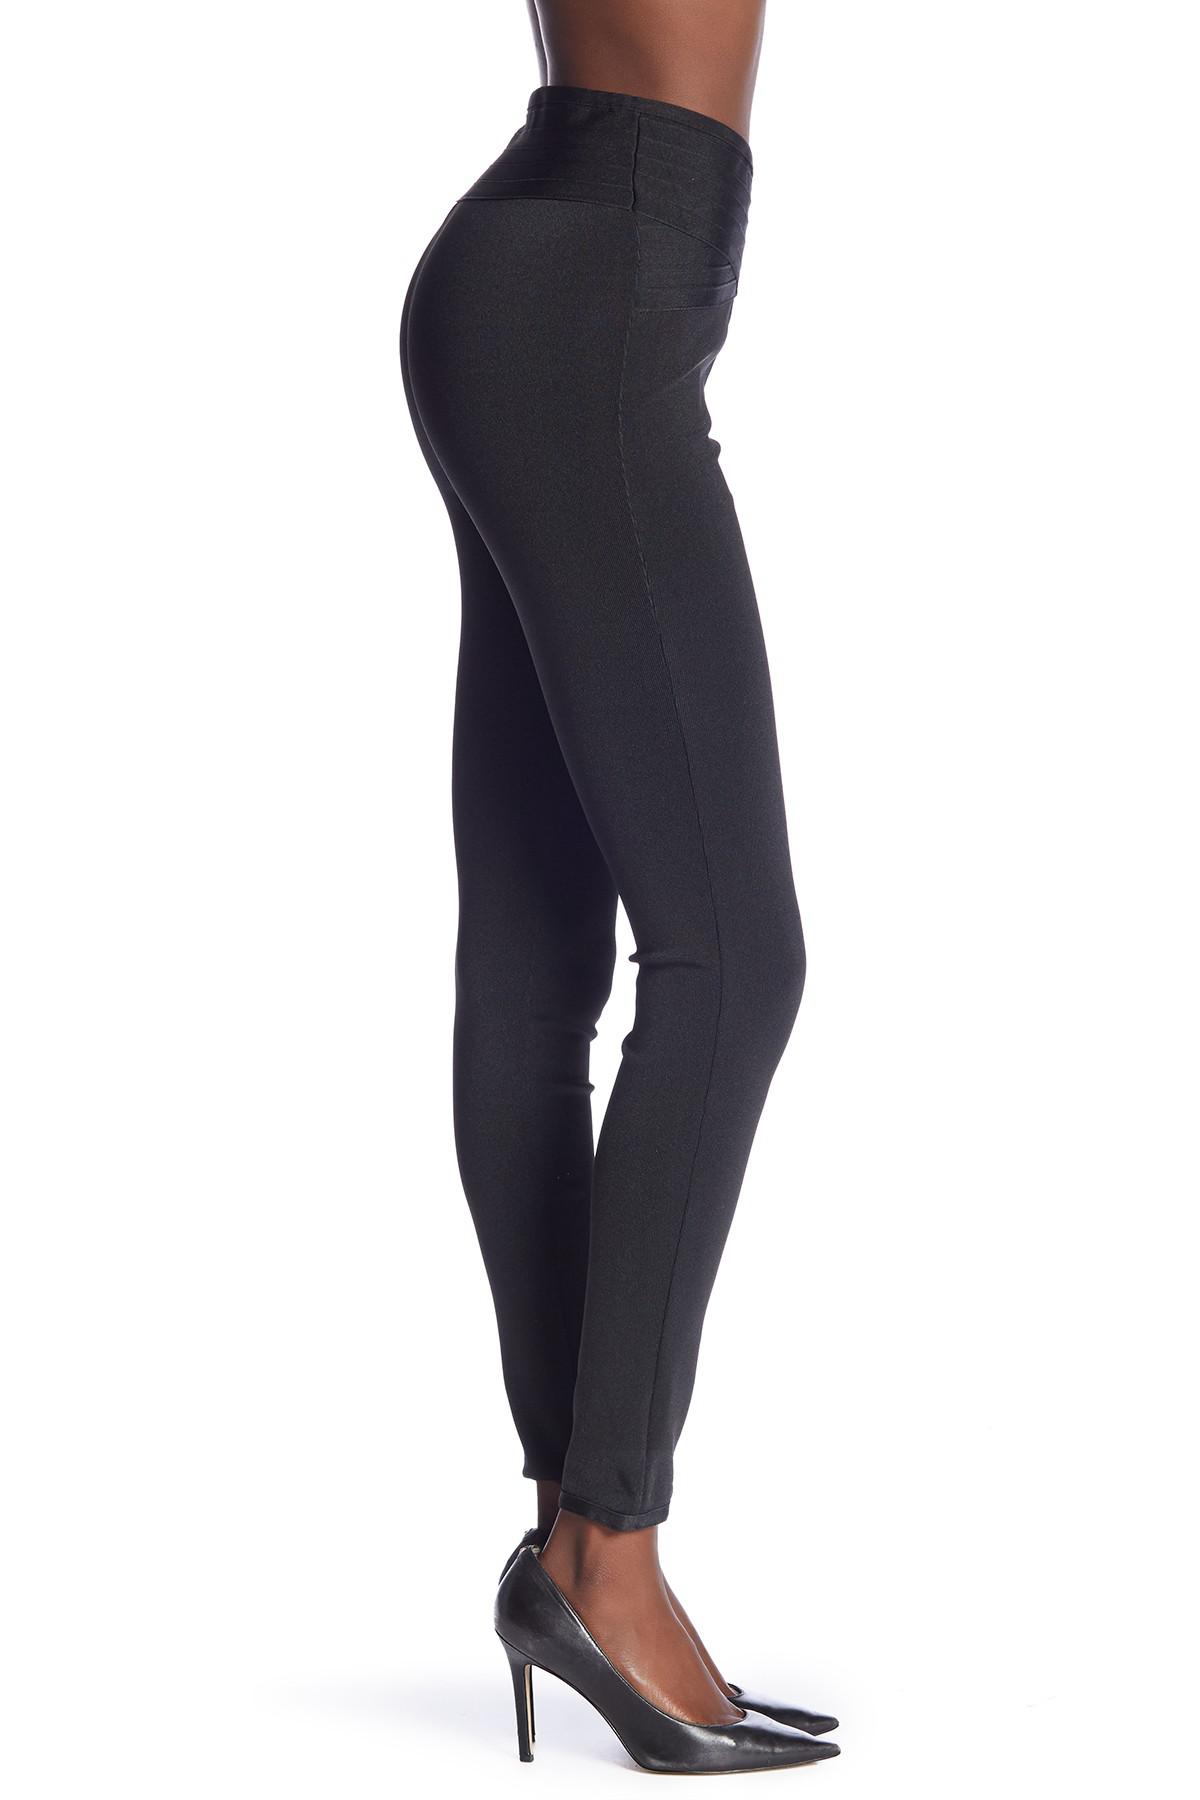 Wow Couture Bandage Leggings in Black | Lyst